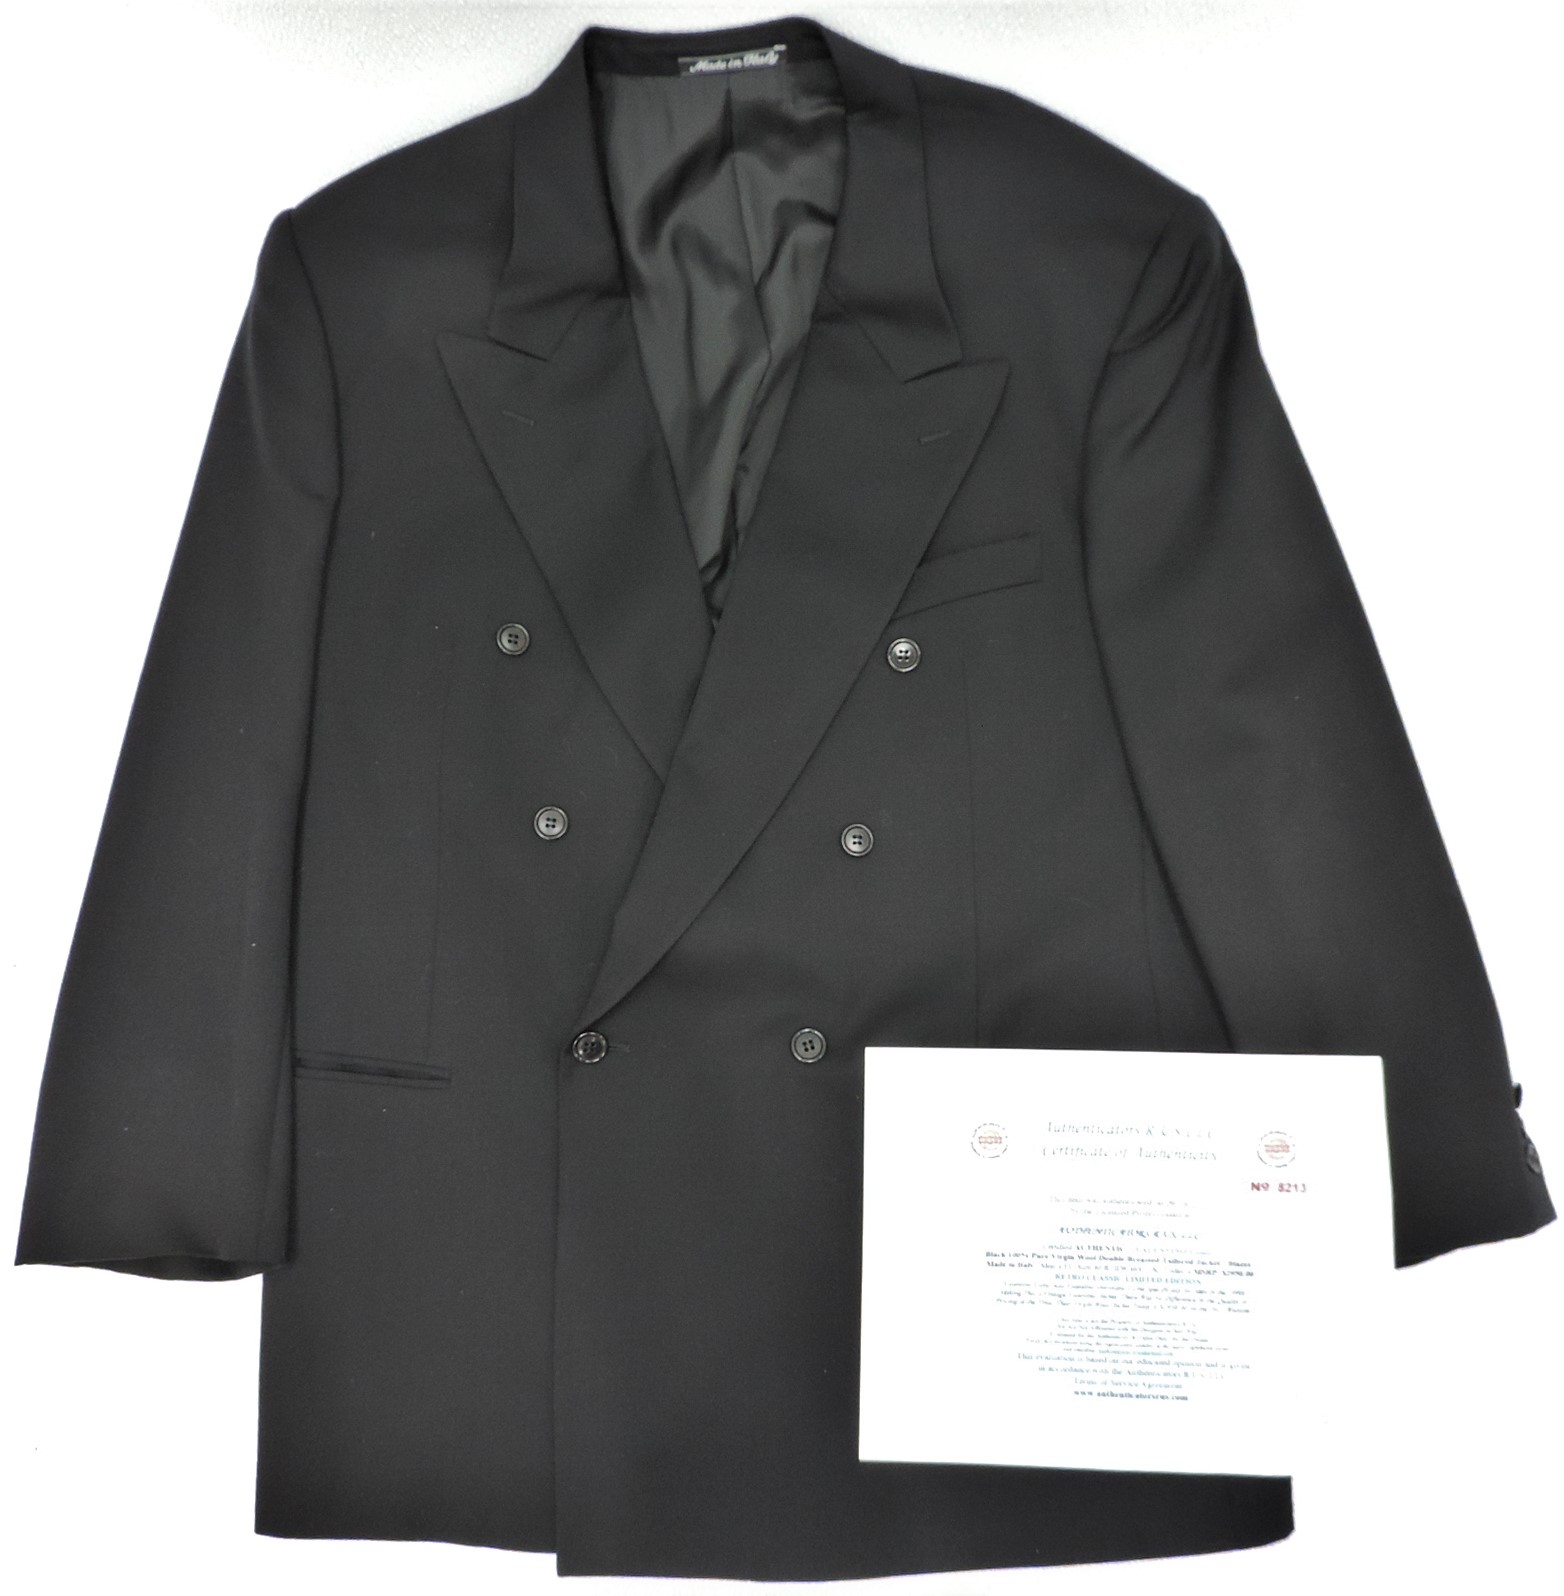 Buy Black Pure Virgin Wool Tailored Jacket Mens EU Size 40 With COA for USD  97.49 | GoodwillFinds